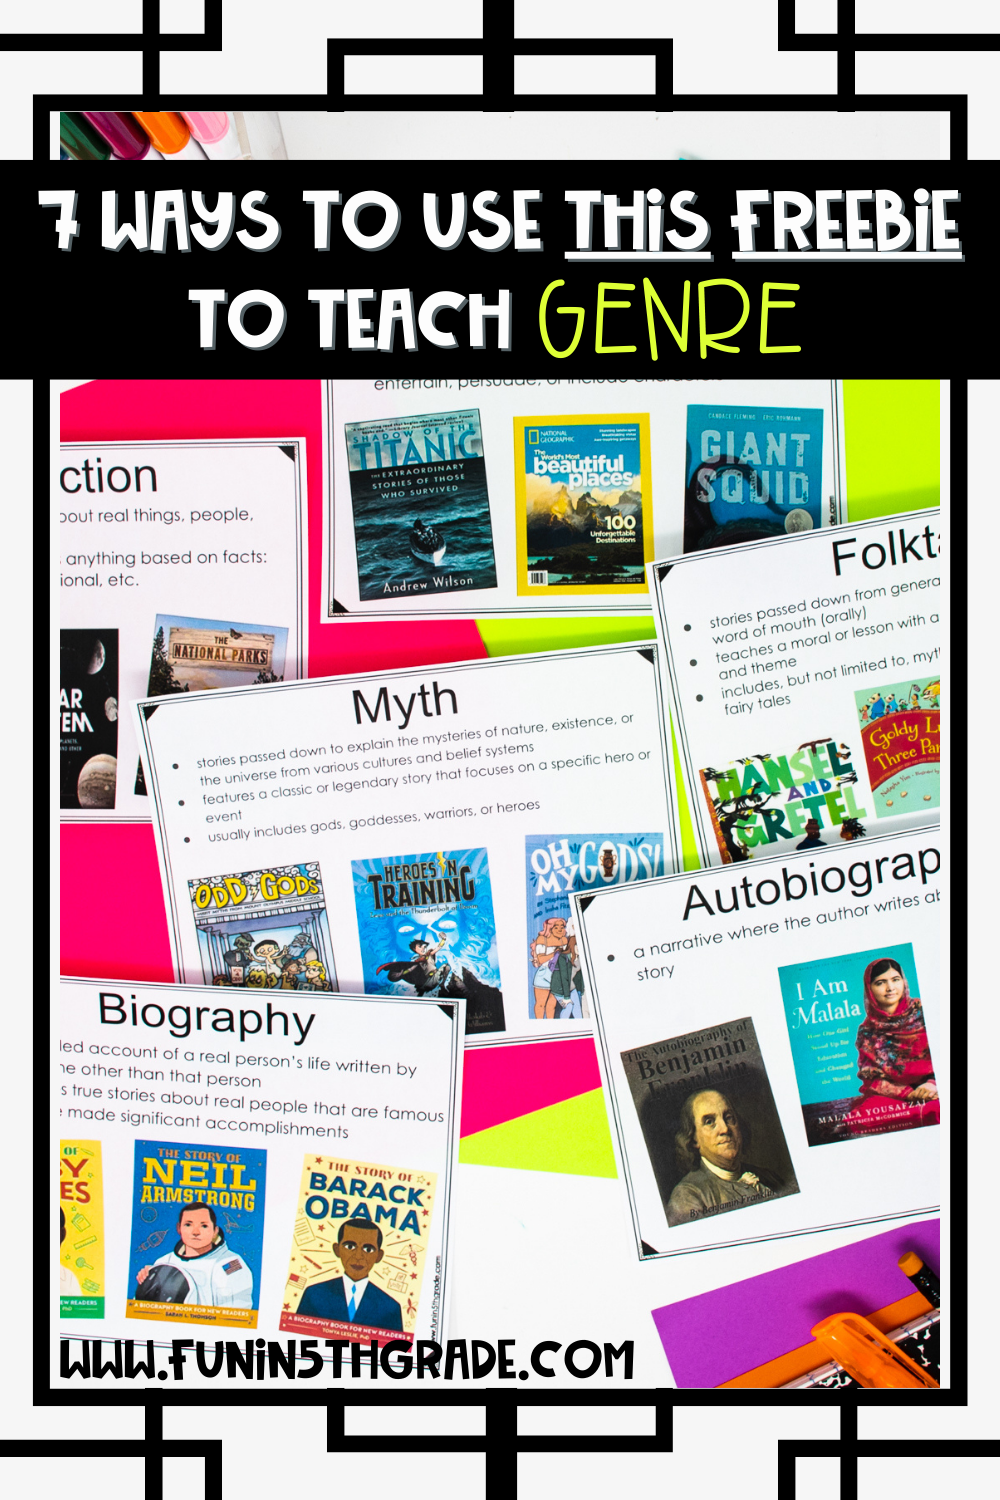 7 Ways to study genre in your upper elementary classroom using this free resource Pinterest Image includes the Reading Genre Slides laid out on a table